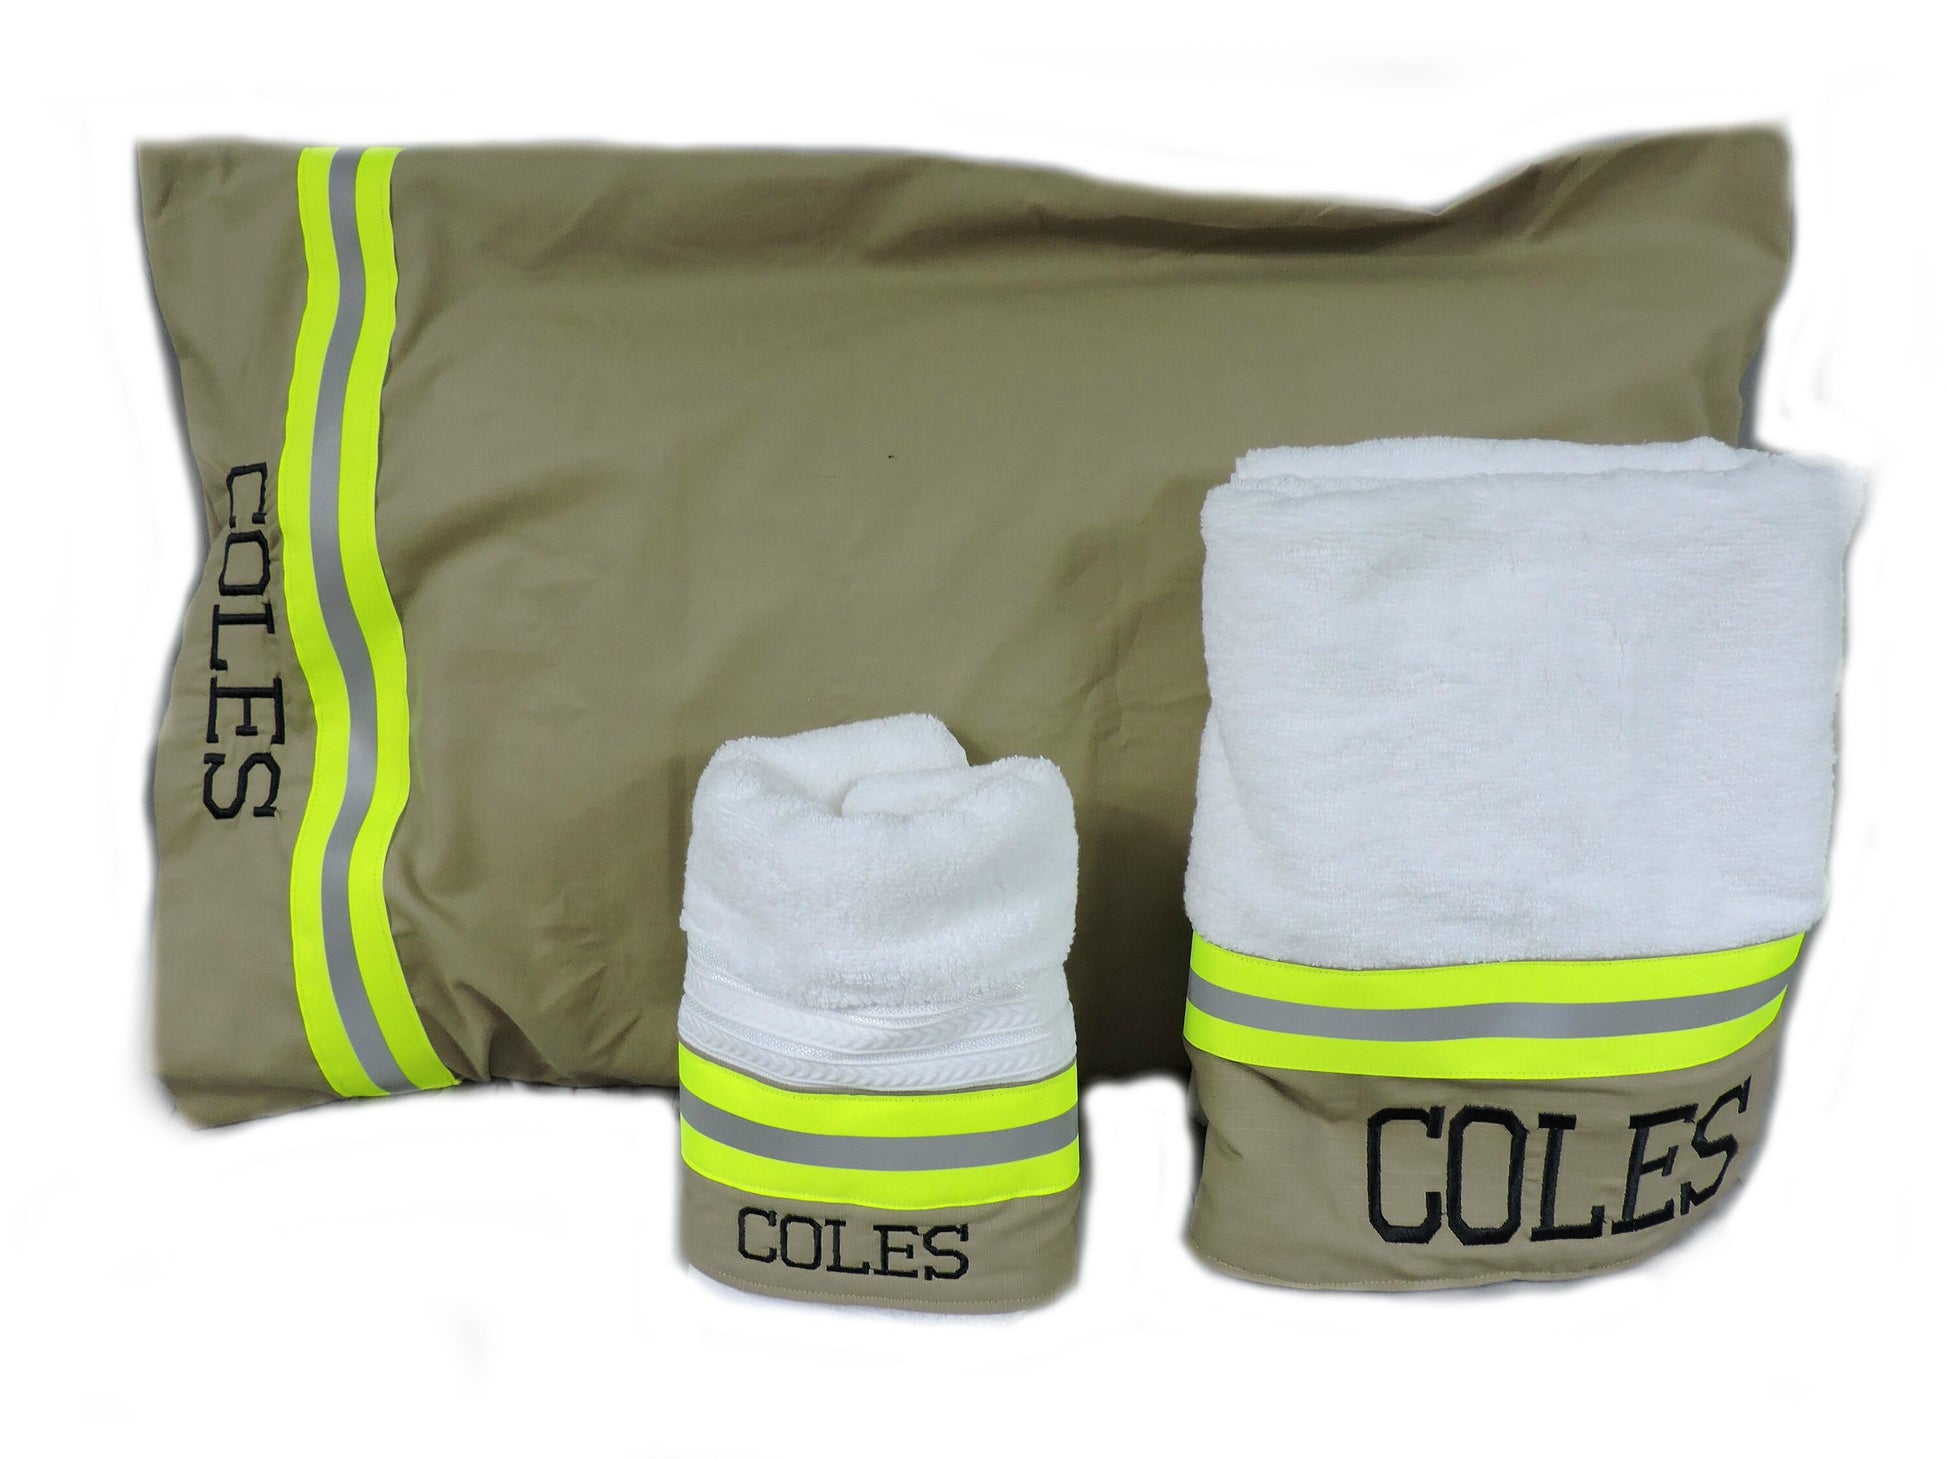 Tan firefighter gift set with pillowcase bath towel and hand towel